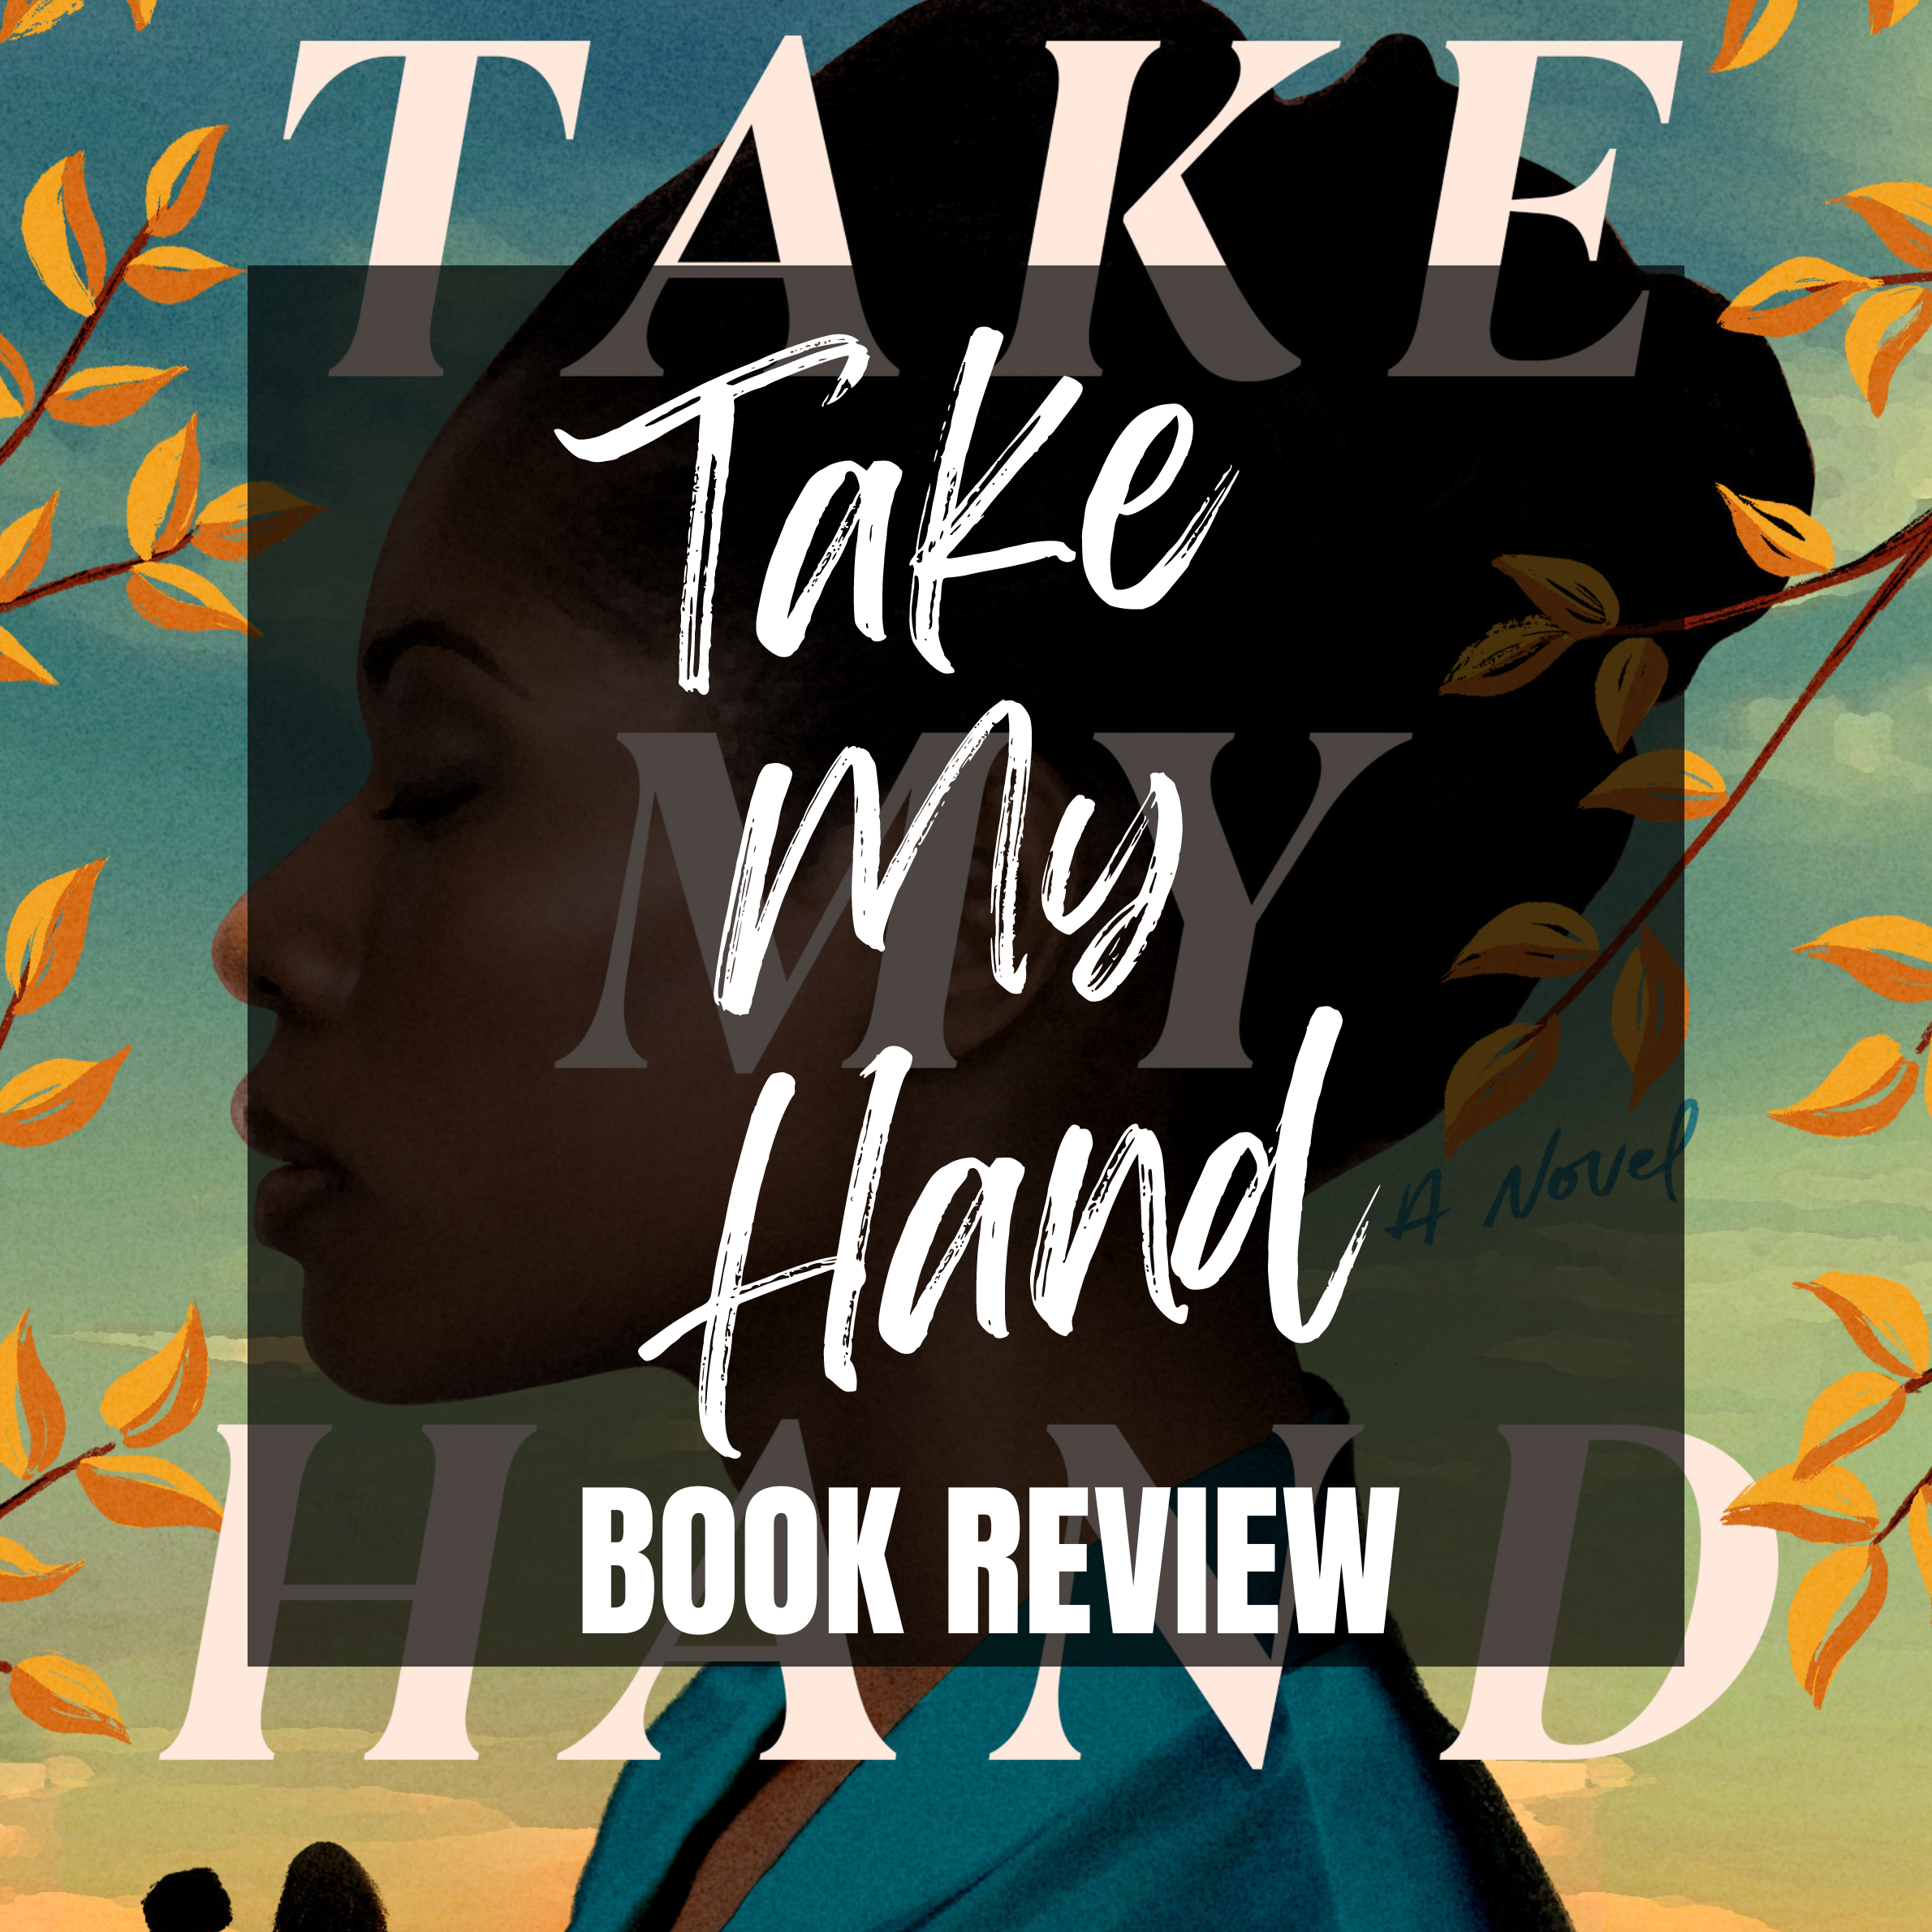 Take My Hand by Dolen Perkins-Valdez–After The Last Page Review